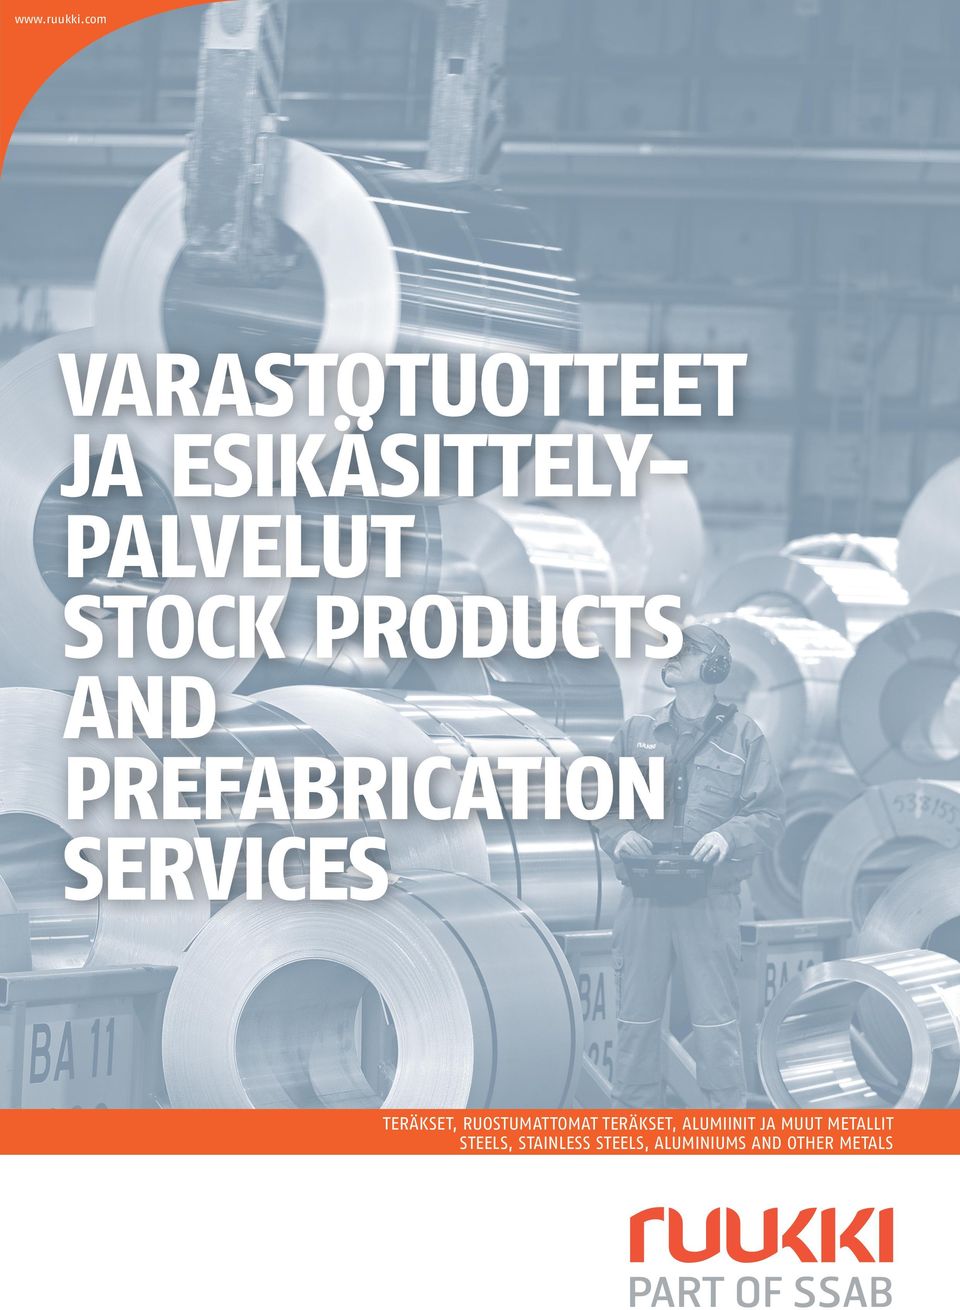 PRODUCTS AND PREFABRICATION SERVICES TERÄKSET,